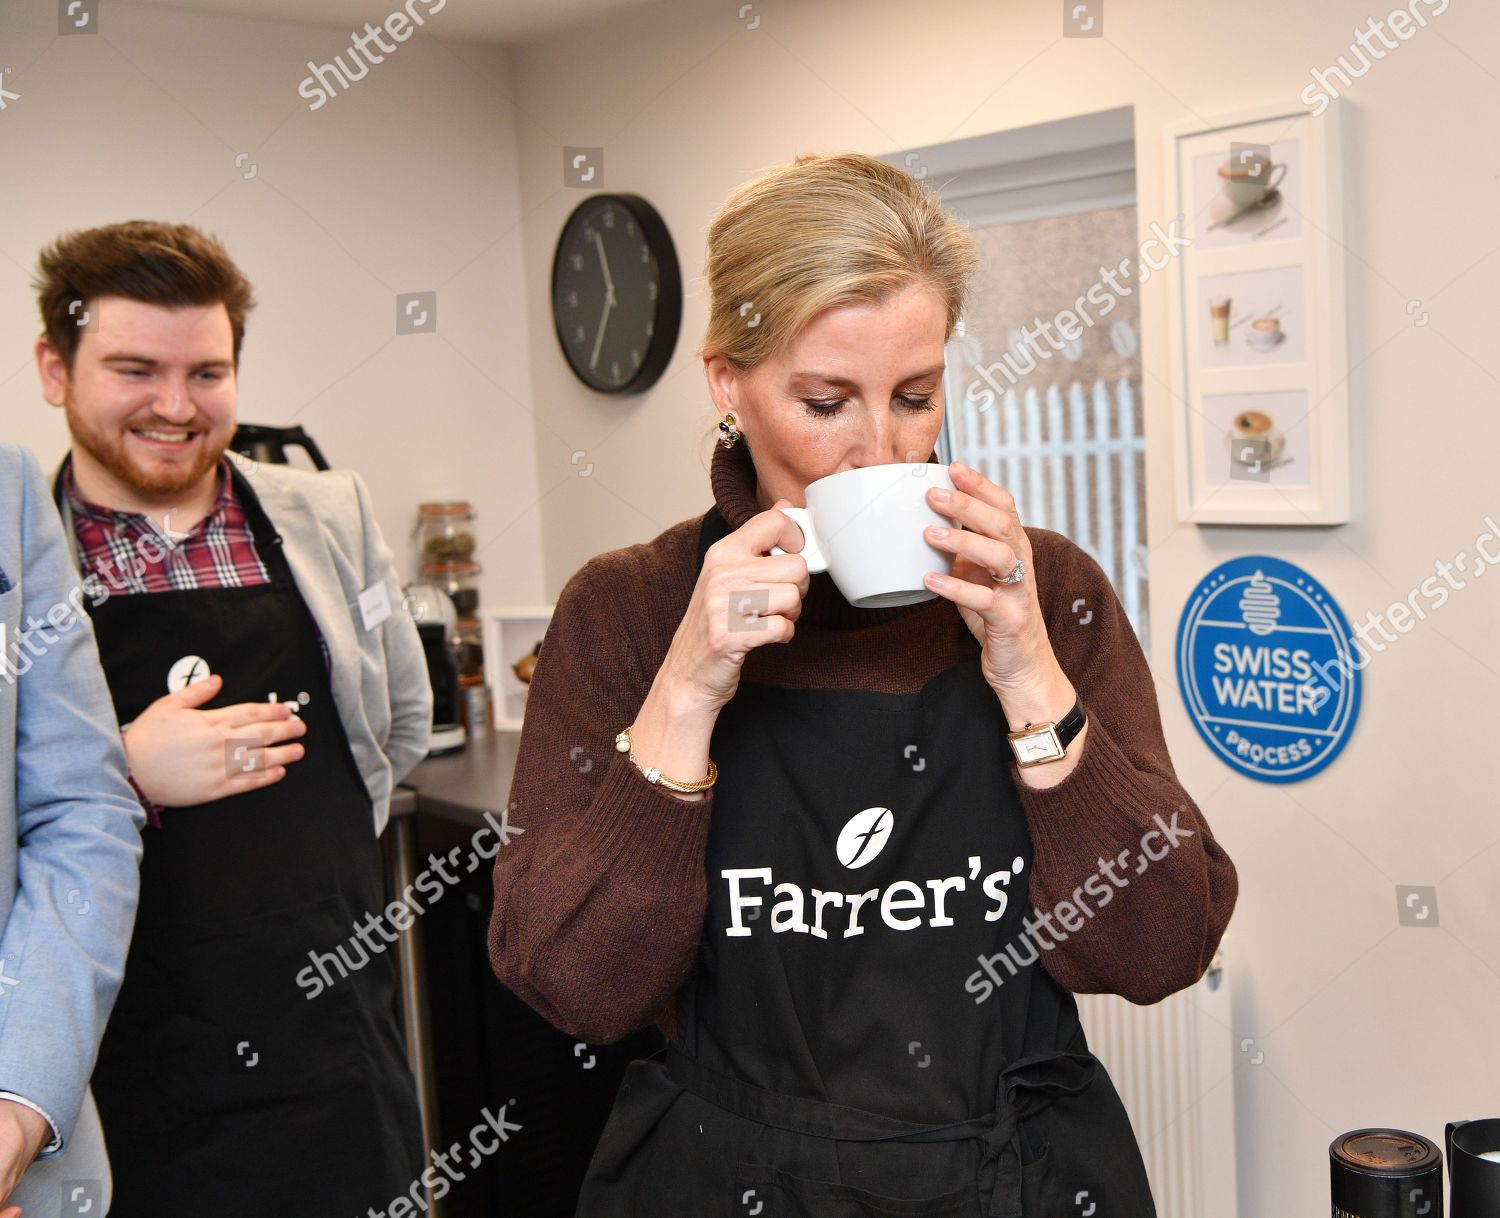 sophie-countess-of-wessex-visit-to-cumbria-shutterstock-editorial-10095439u.jpg